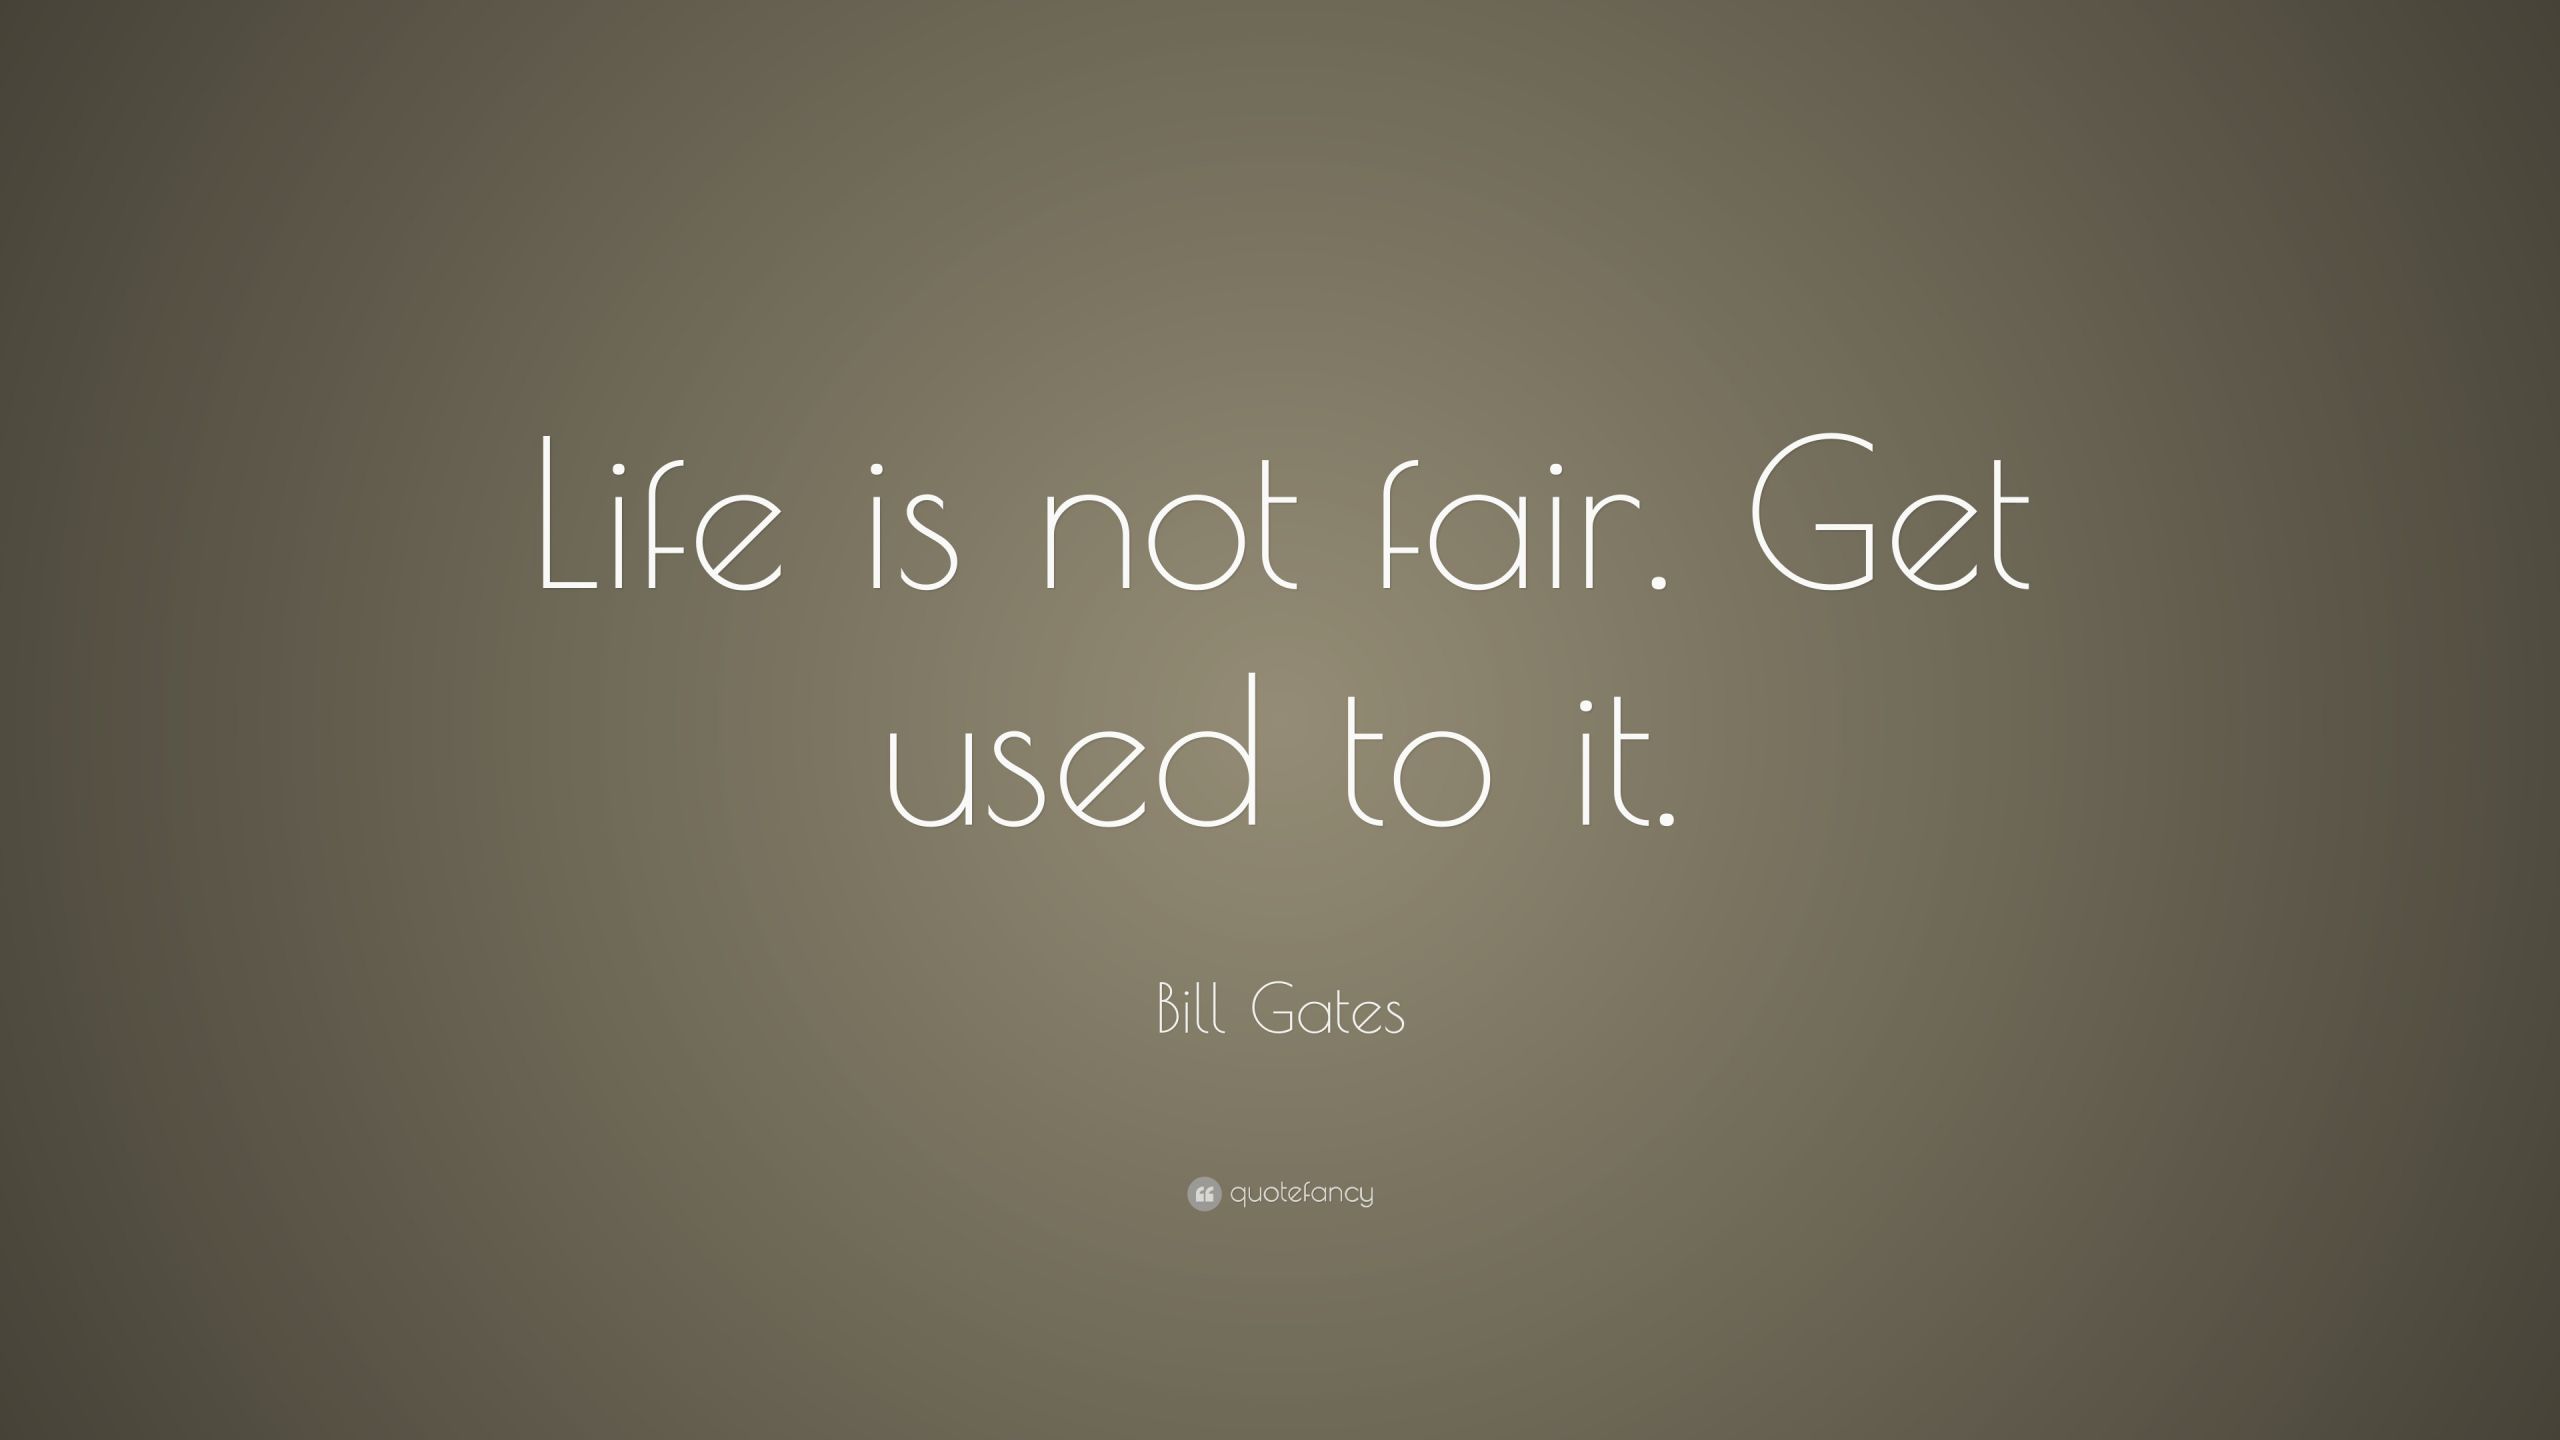 Life Is Not Fair Quotes
 Bill Gates Quote “Life is not fair Get used to it ” 19